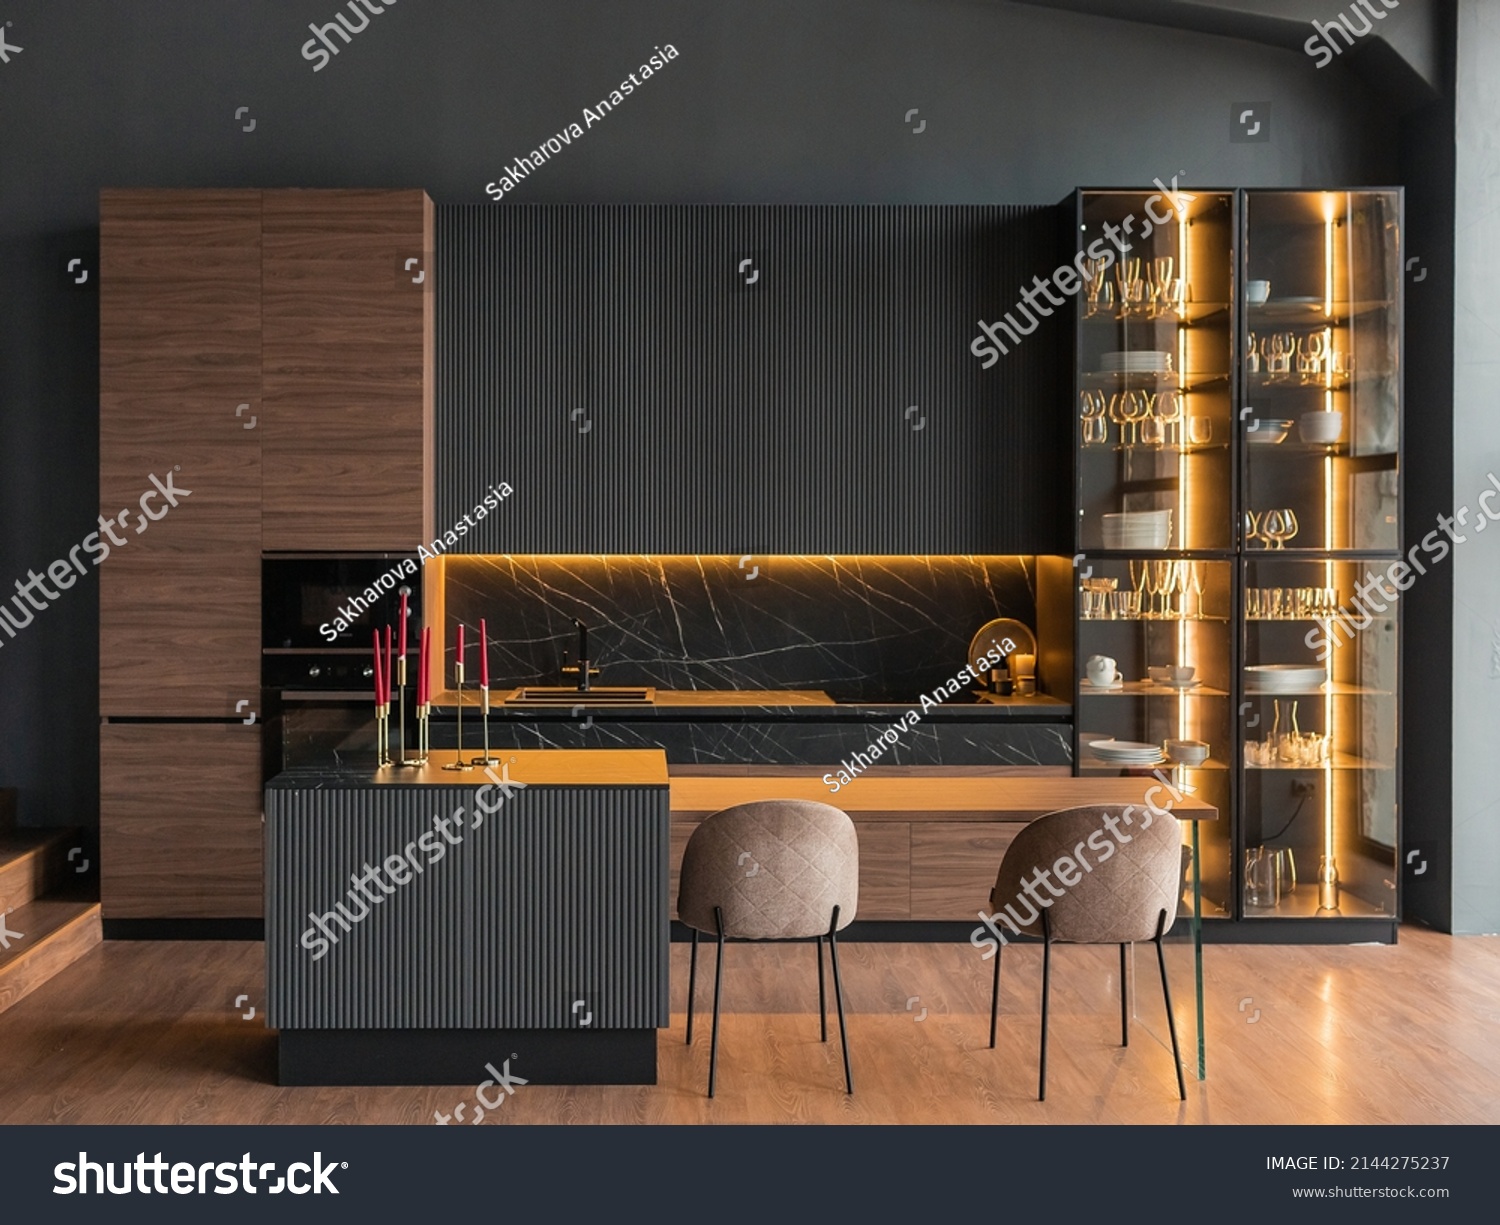 contemporary kitchen in a modern style, wooden floor, dark grey interior.  kitchen island. cabinet with glass doors and lighting for wine glasses. upholstered chairs. countertops with black cabinets #2144275237